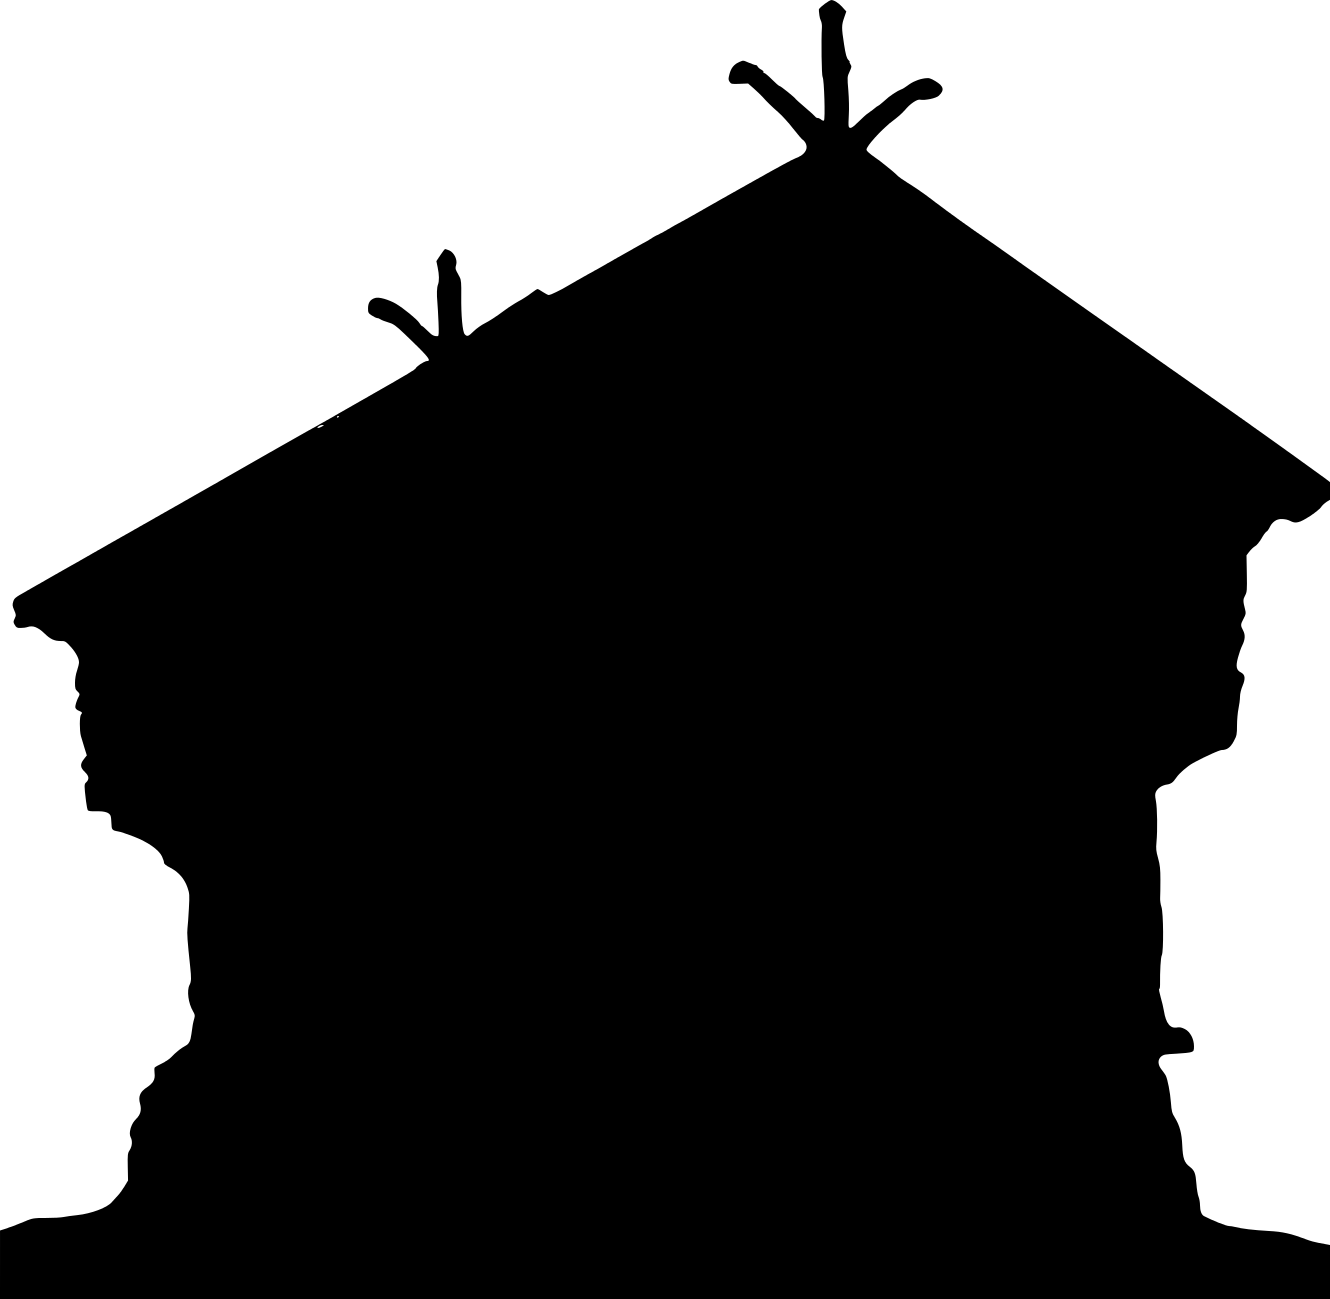 House Silhouette - ClipArt Best